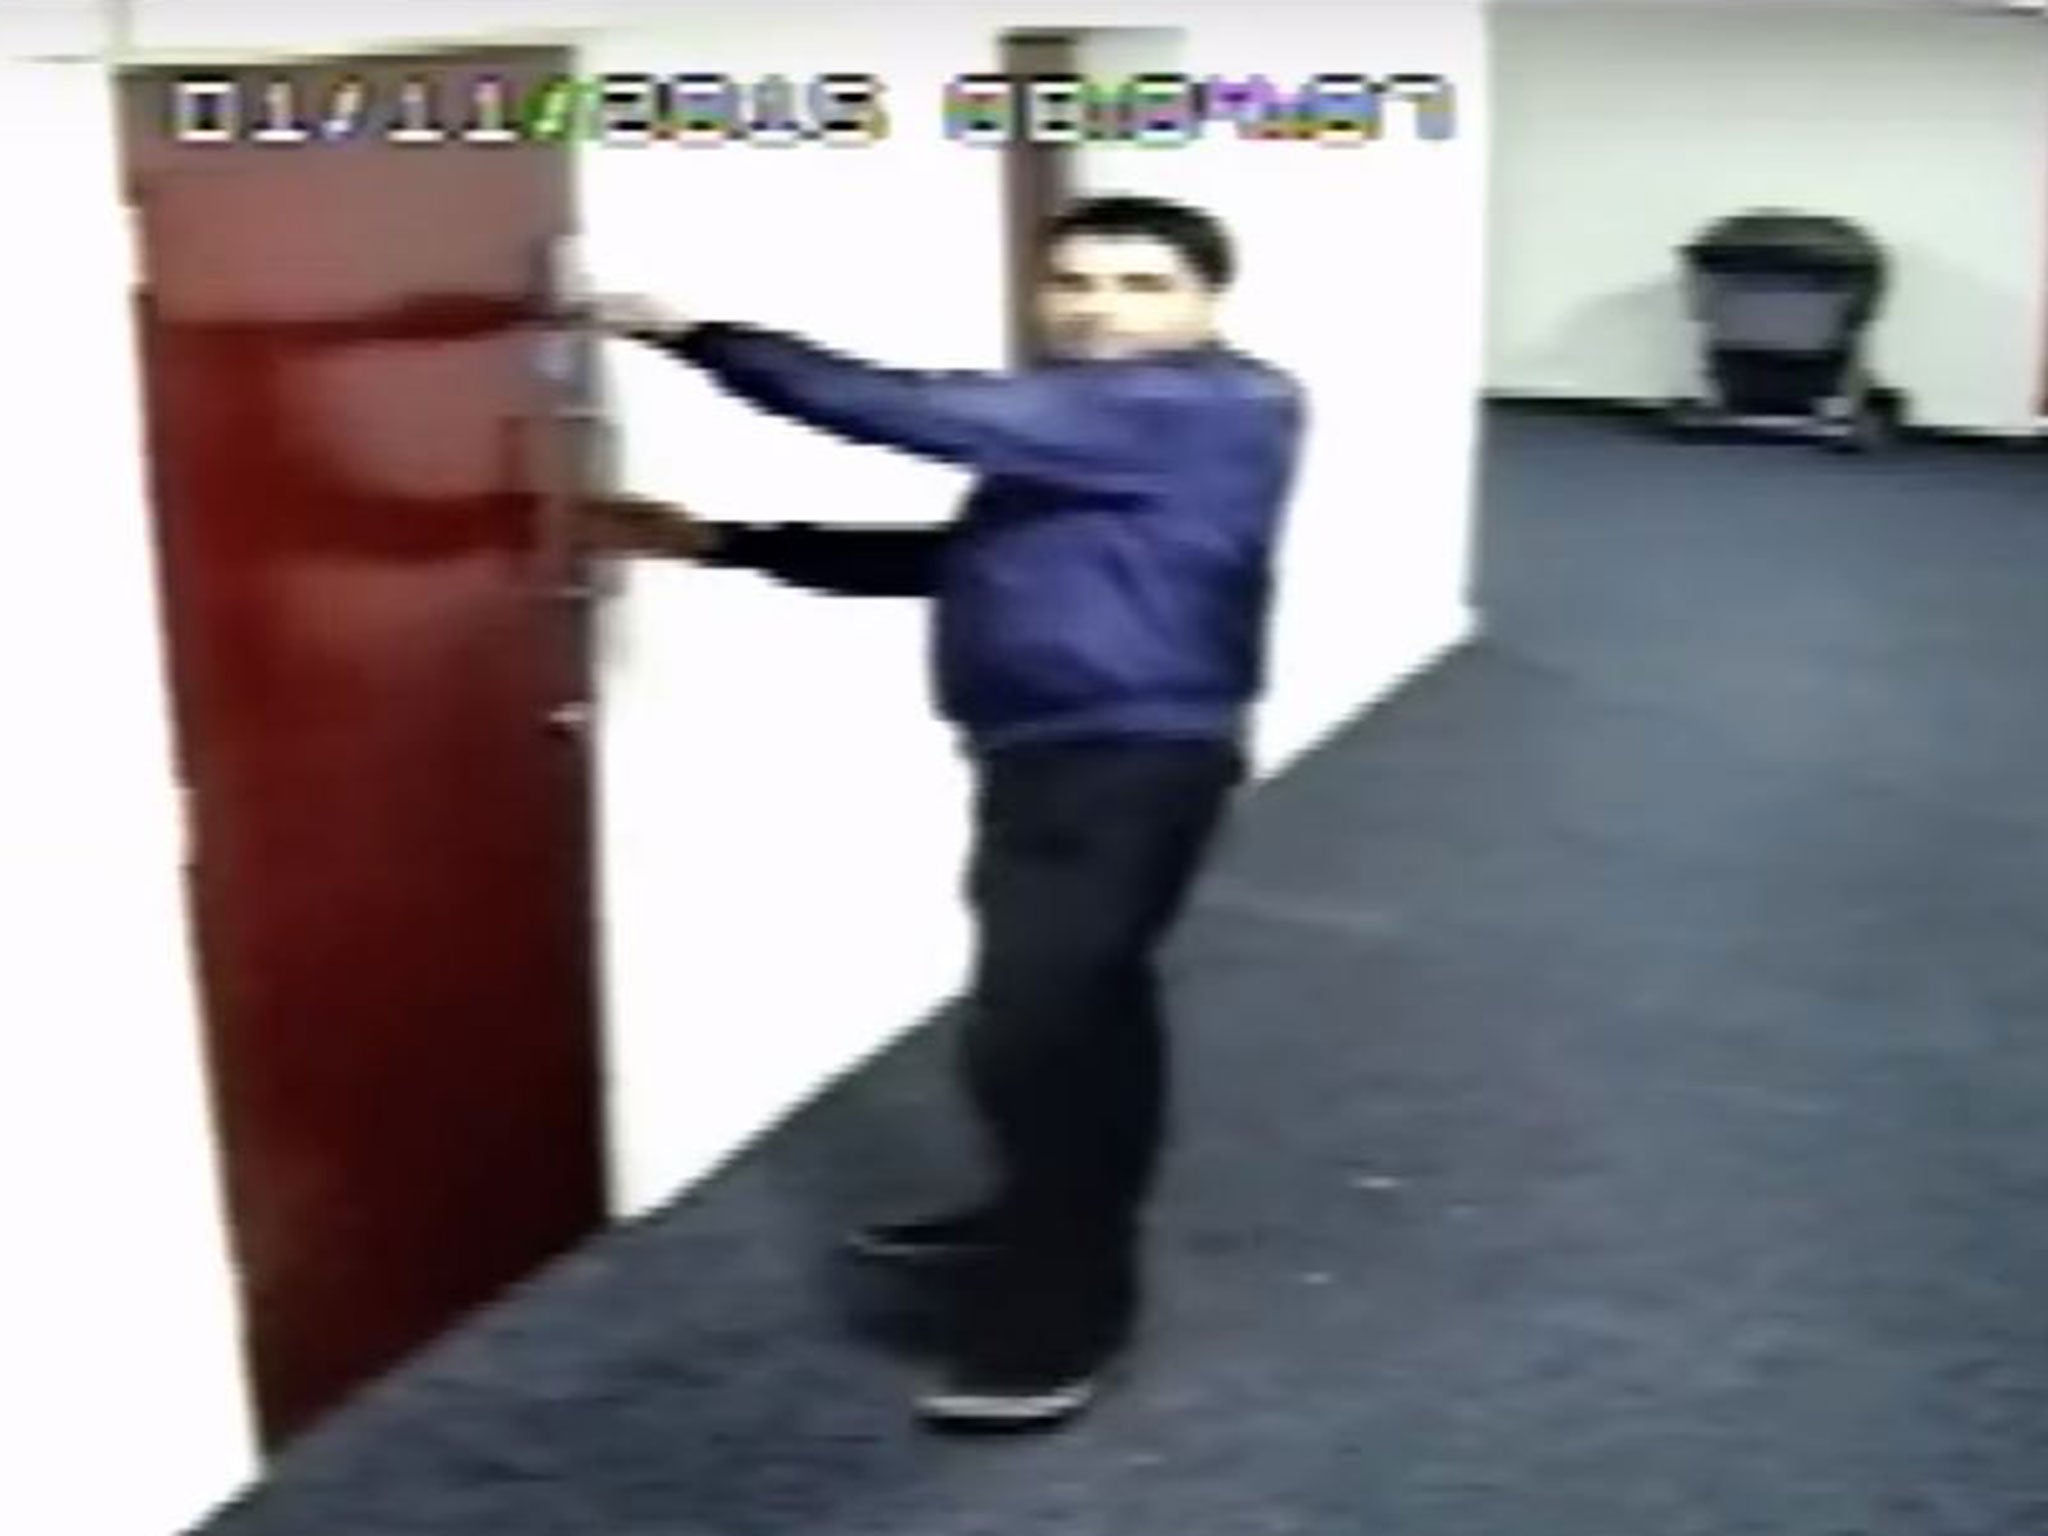 CCTV images of Tahir Nazir, 40, attempting to enter several student flats in New Lawrence House in Hulme, Manchester